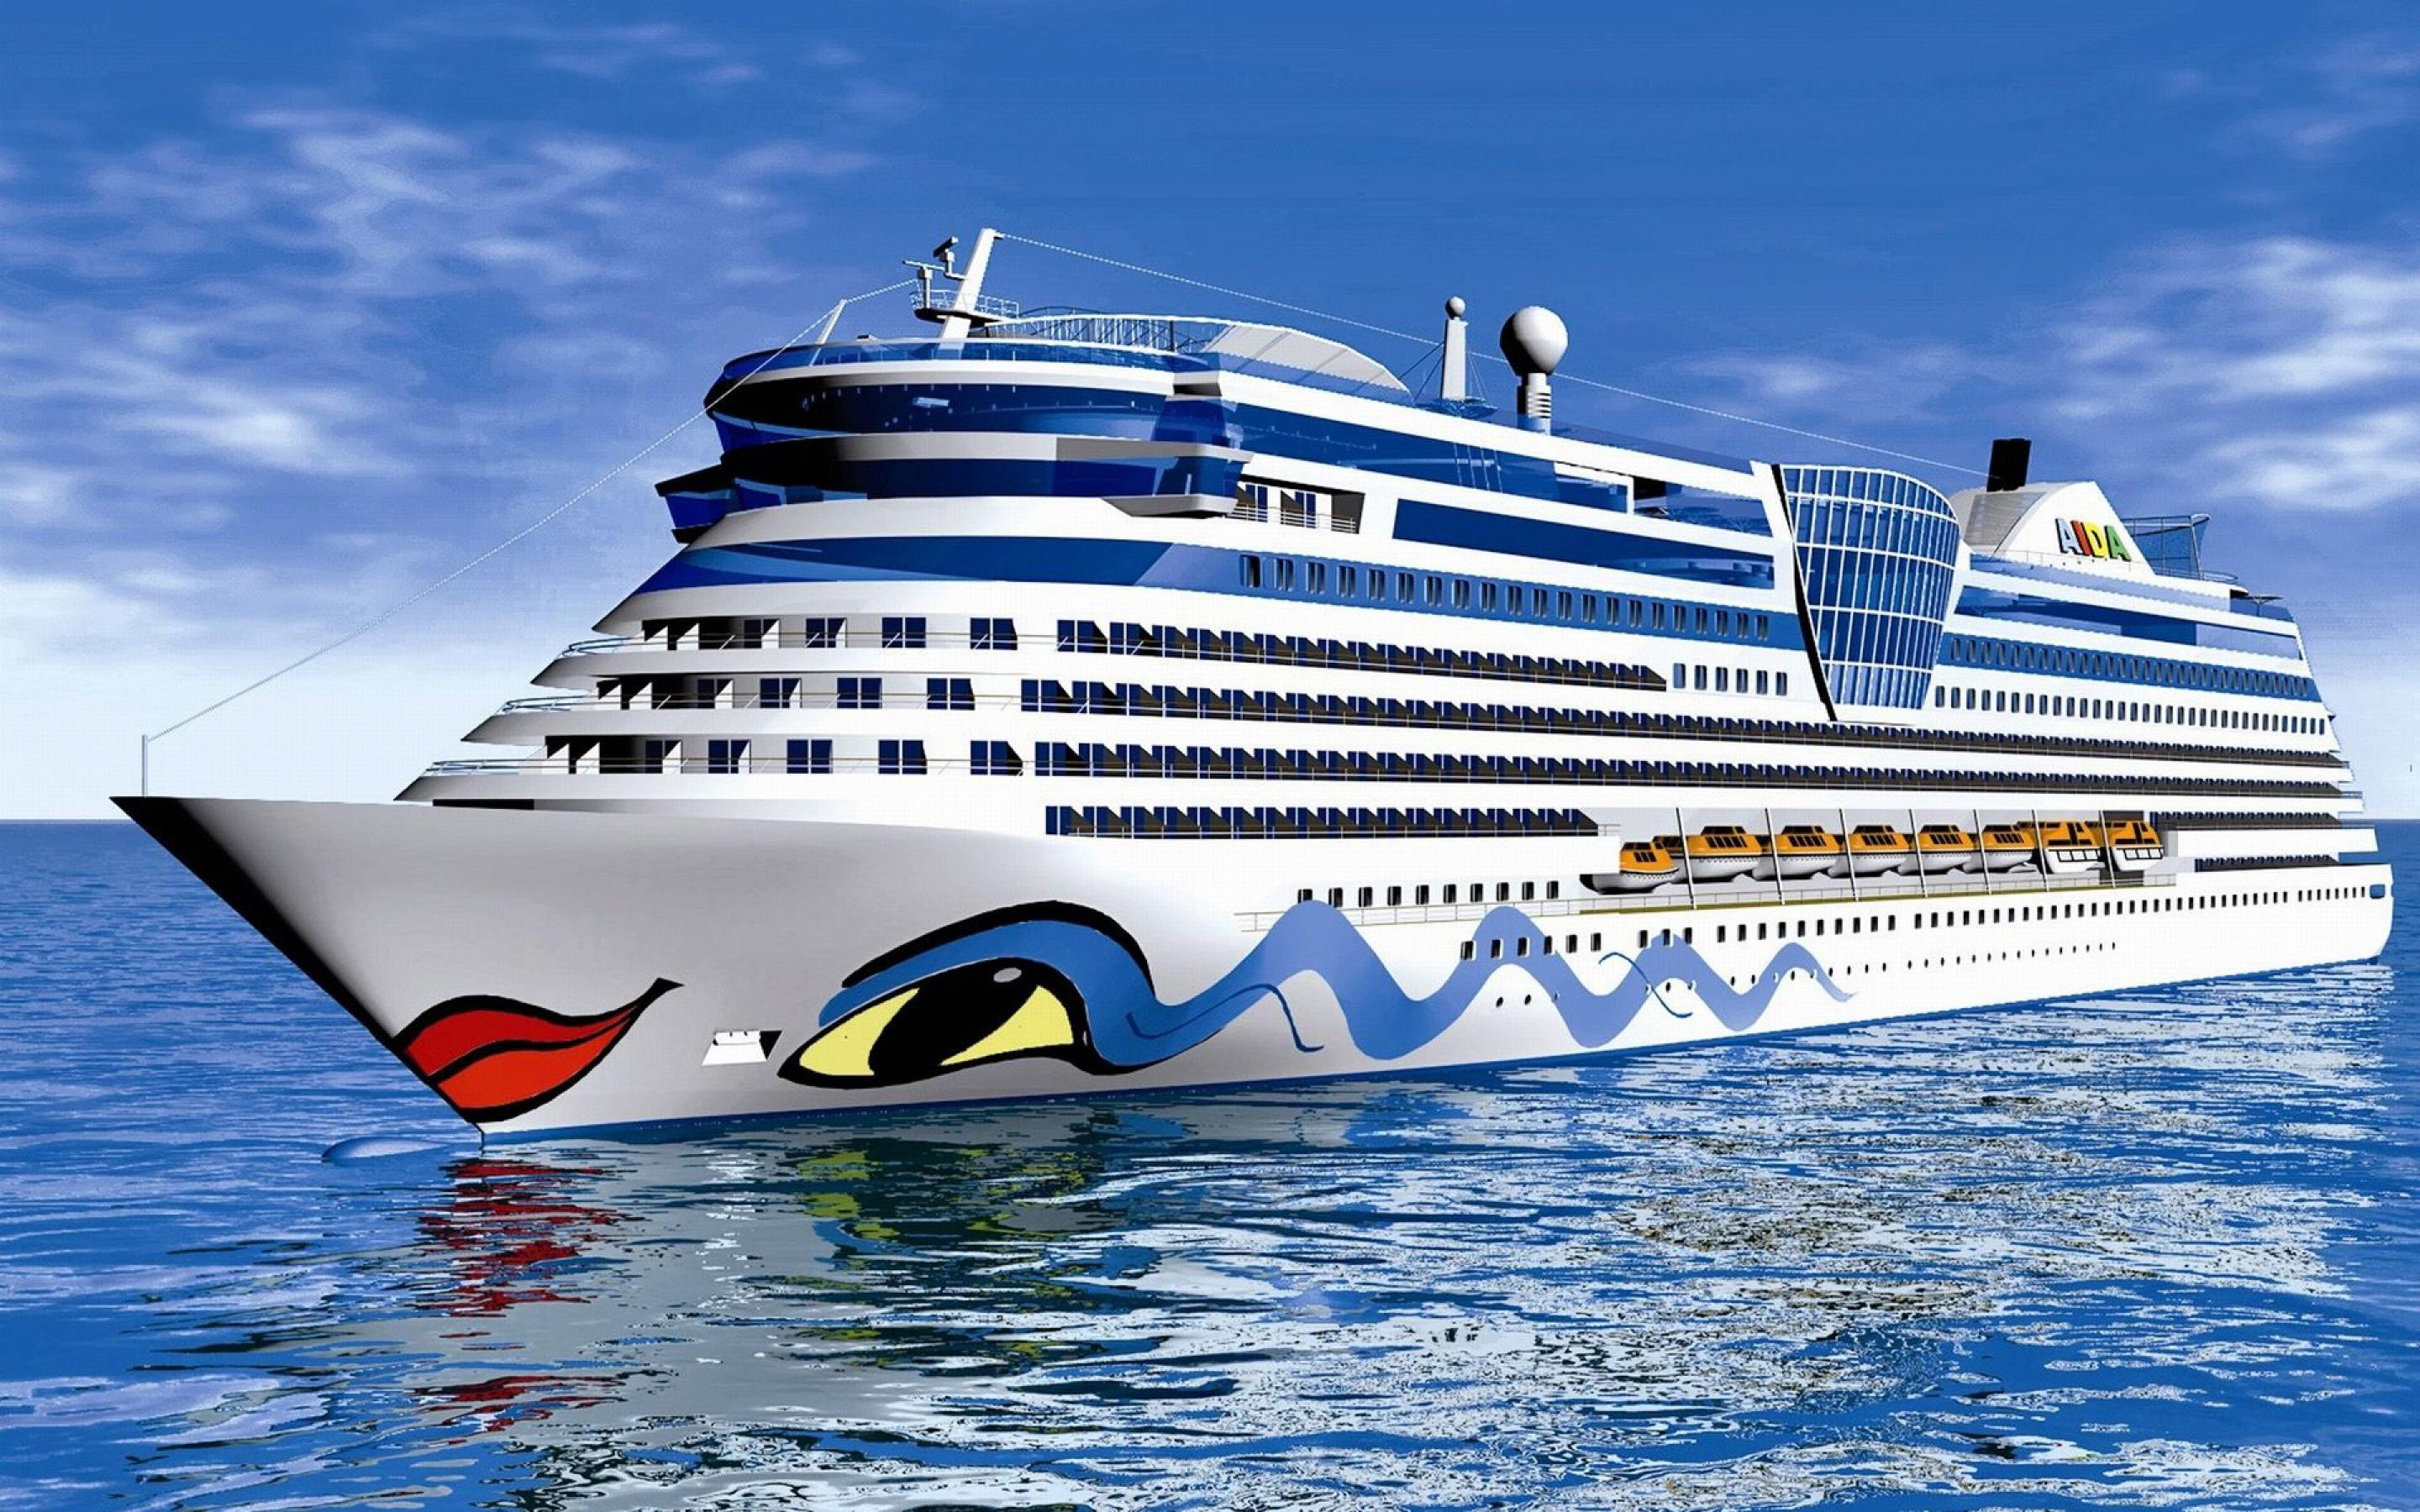 Cruise Ship Hd Wallpaper Background Image 2880x1800 Id Images, Photos, Reviews